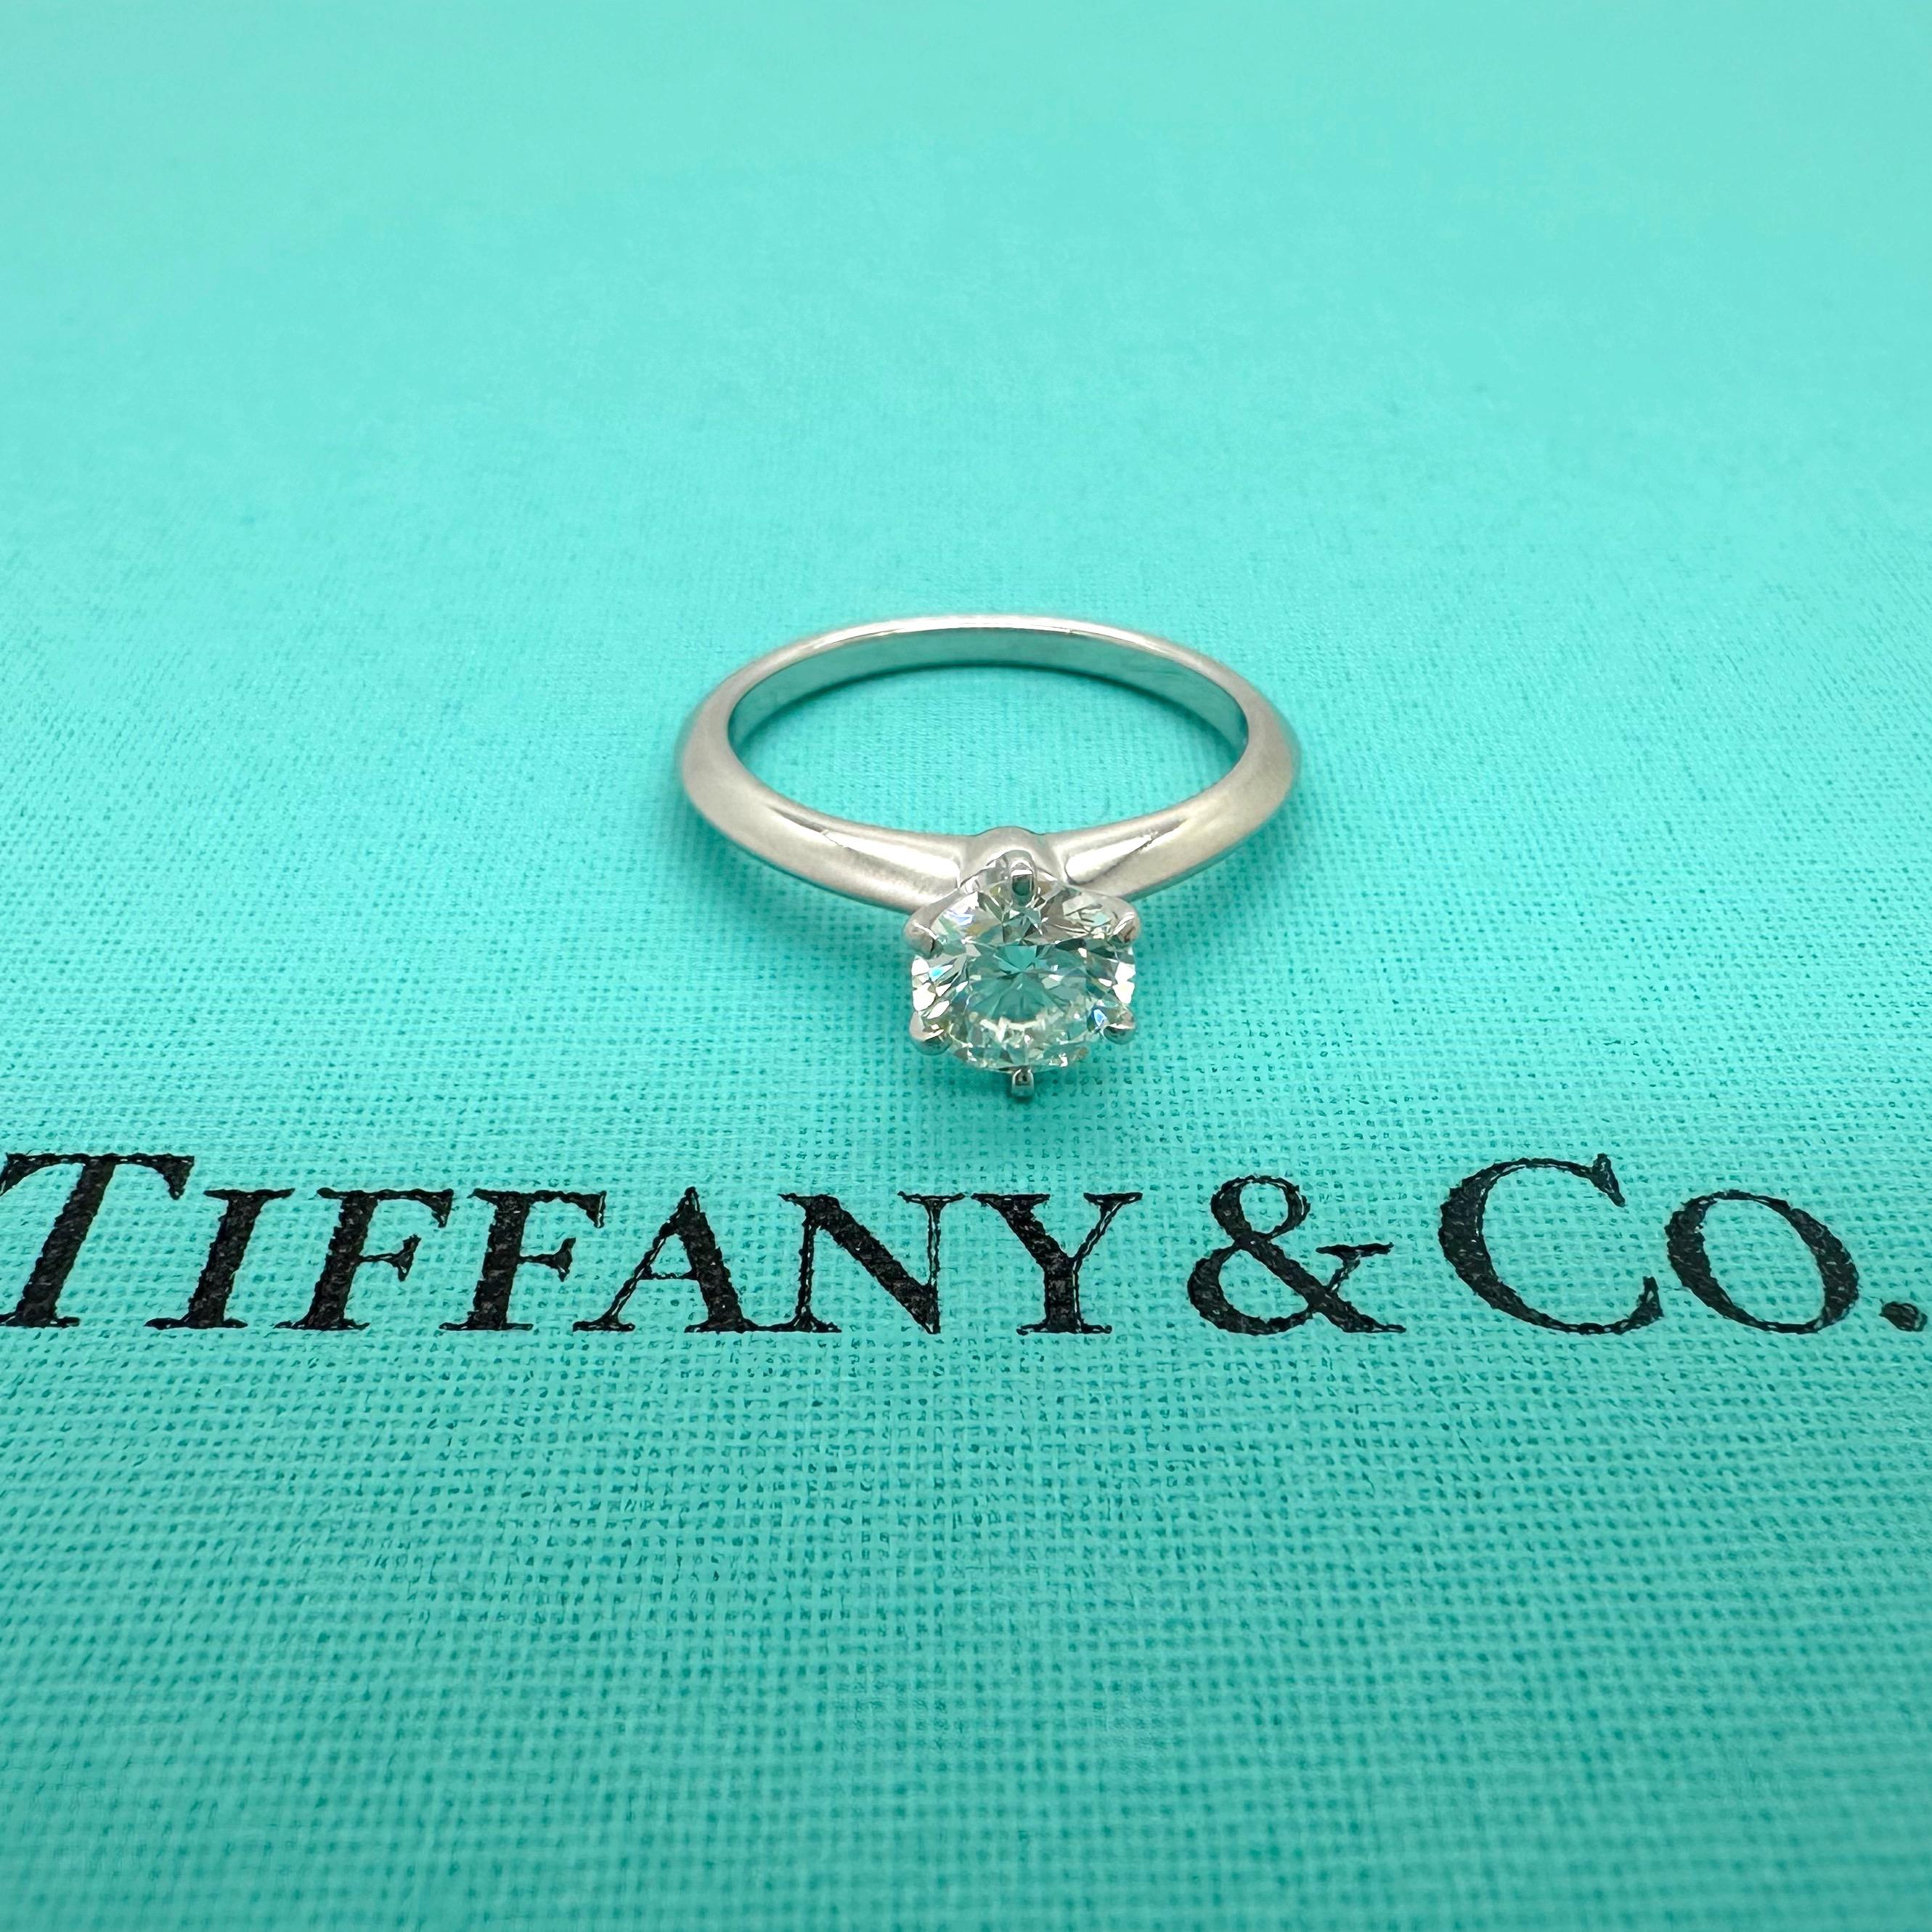 Tiffany & Co. Round Brilliant Diamond 0.80 cts H VS2 Solitaire Engagement Ring For Sale 9